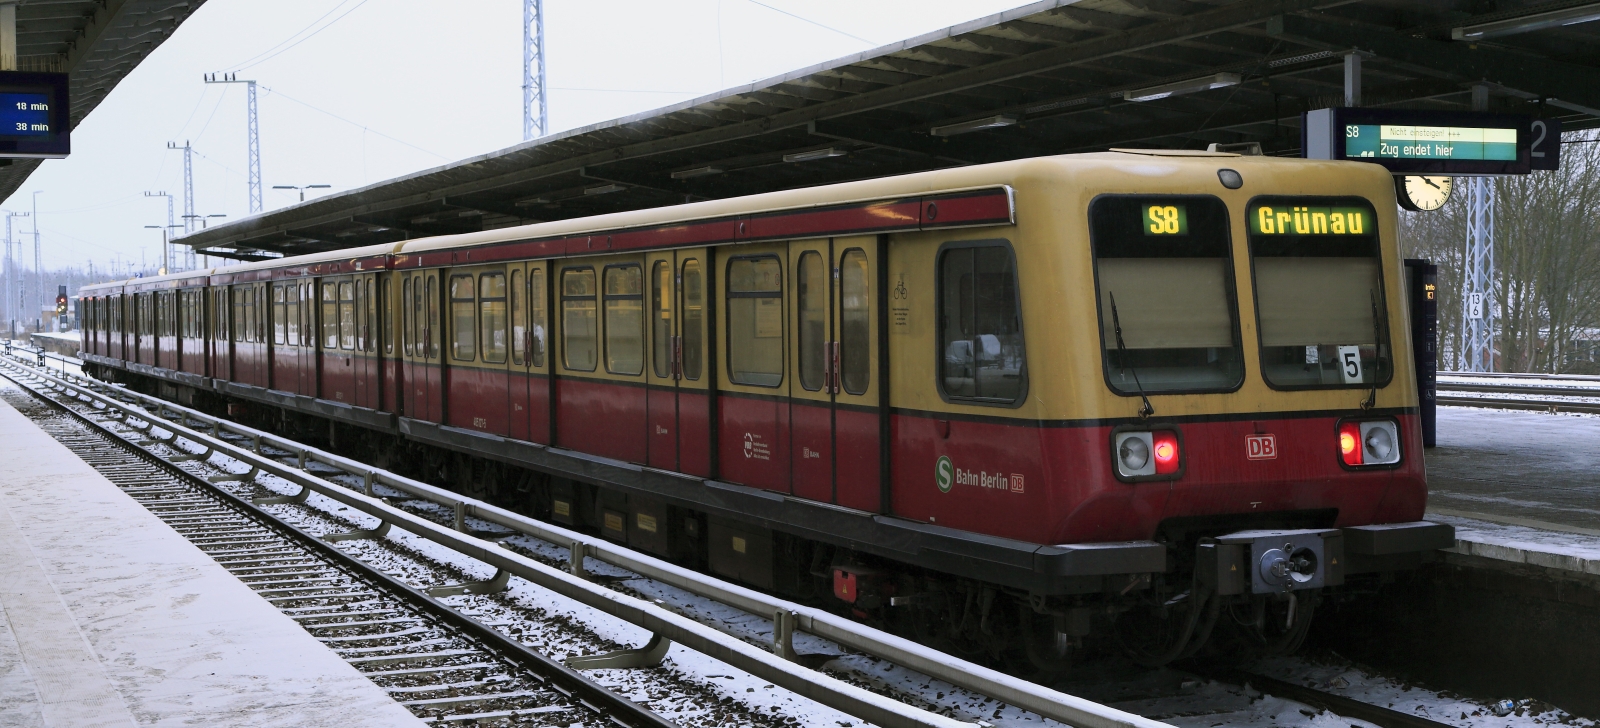 Vehicle in use on the S8 of the Berlin S-Bahn